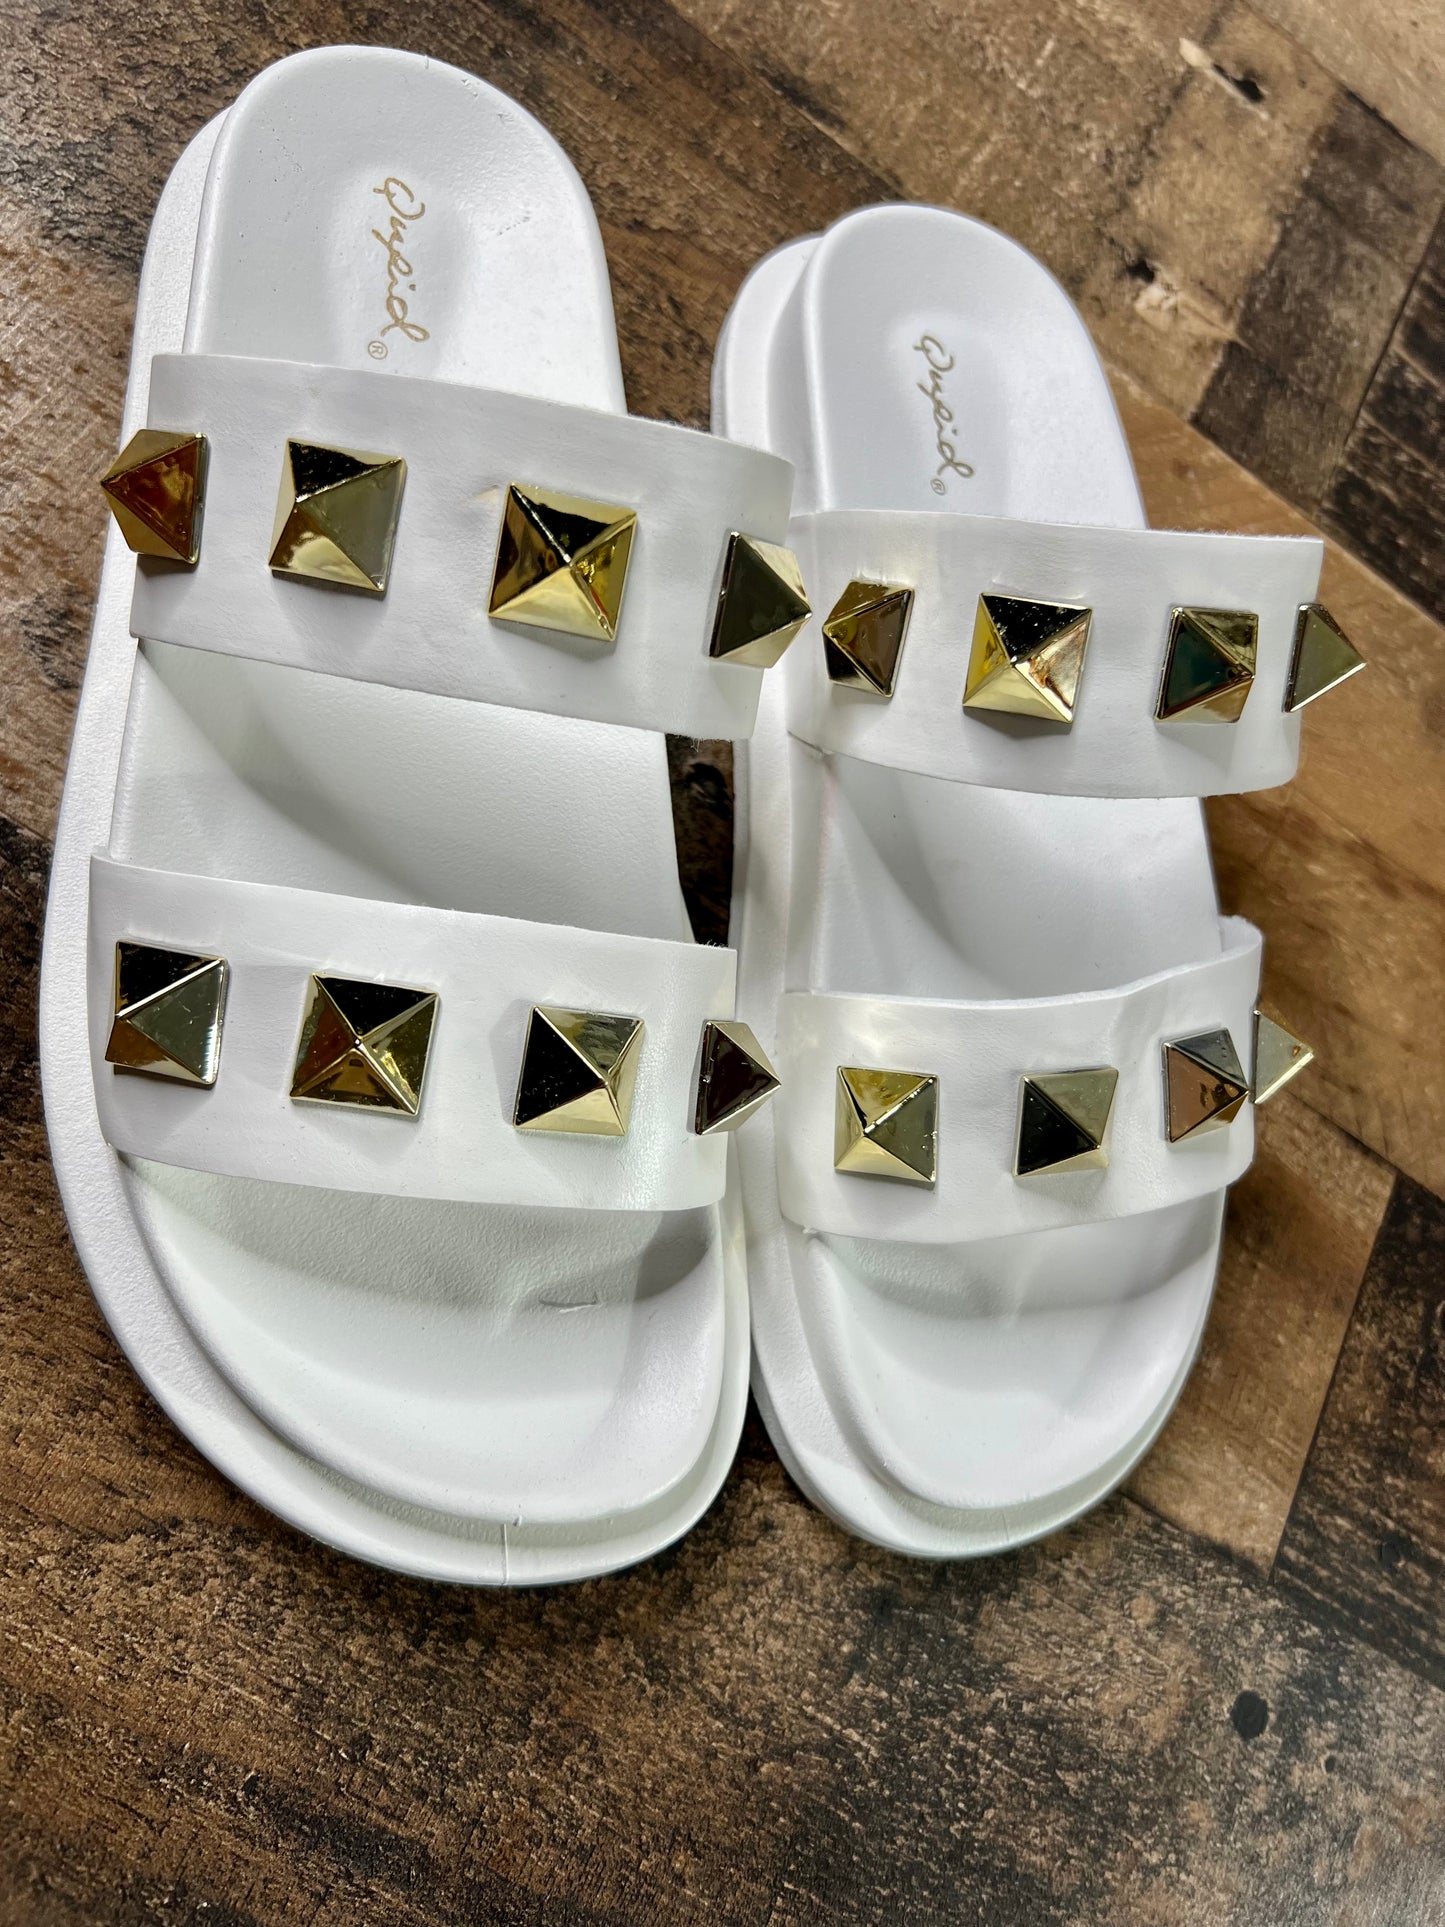 (6 & 7) Stayley Studded Sandals